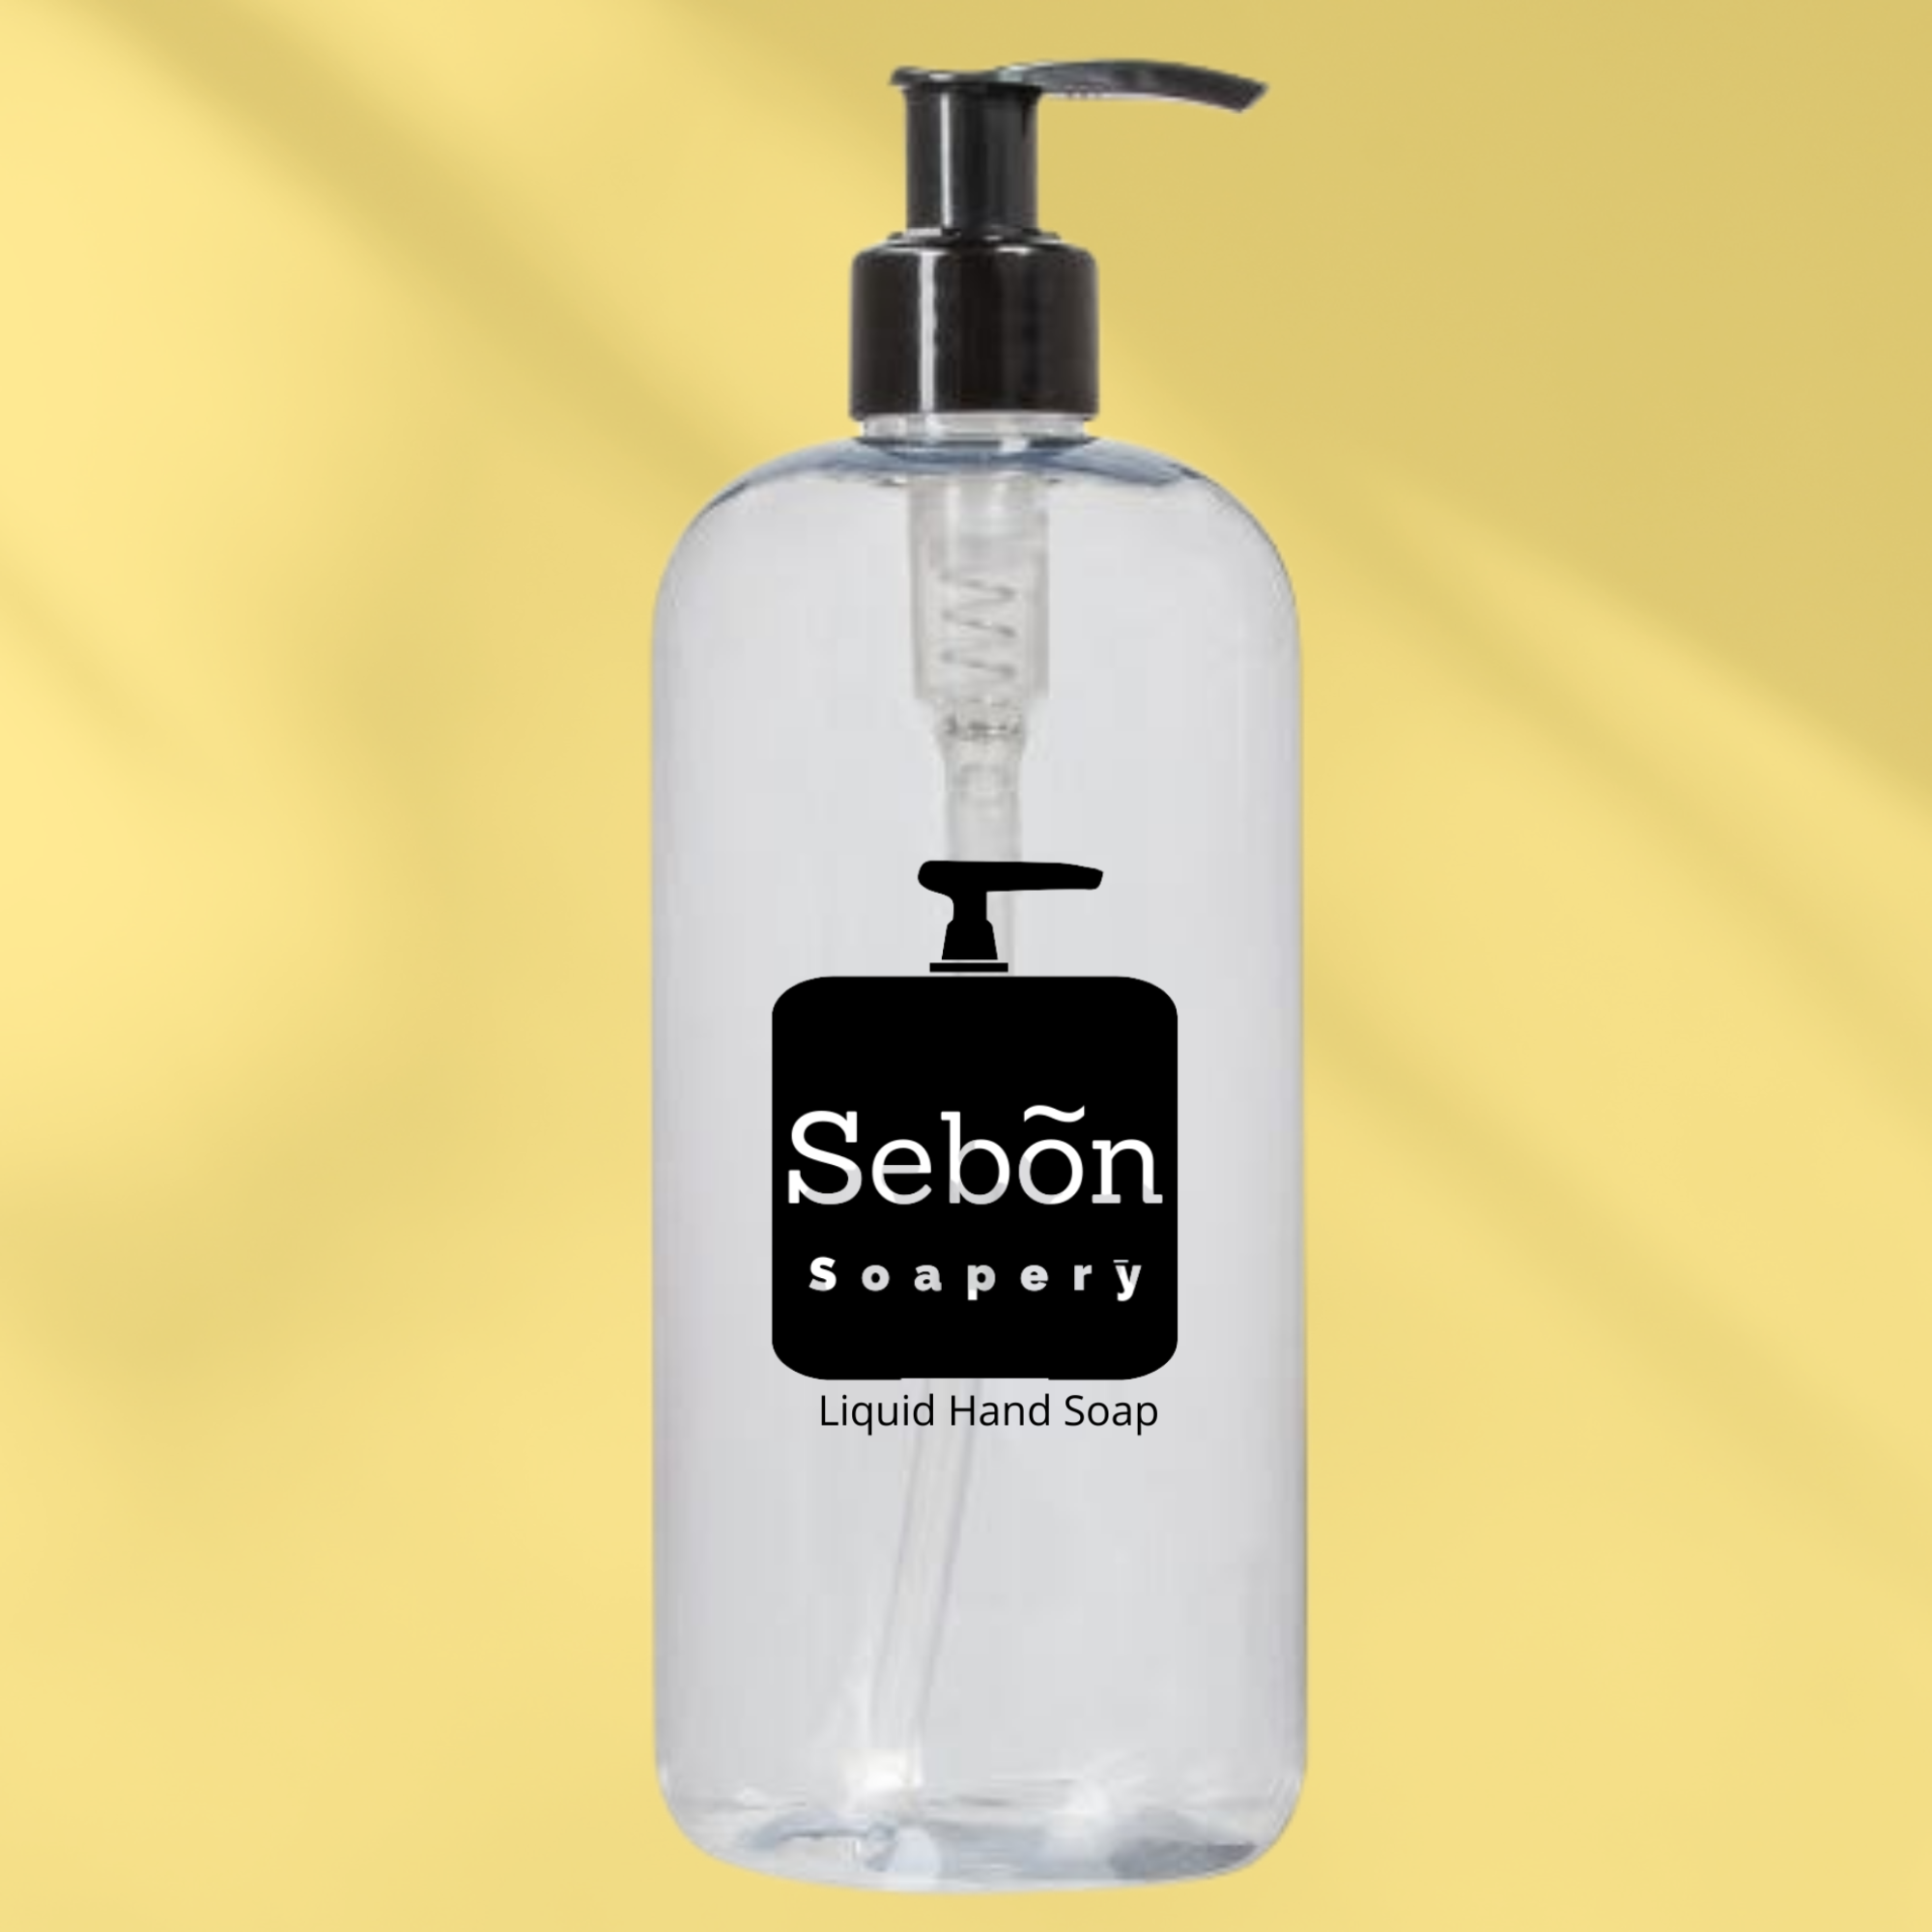 Sebon Autumn Spiced Woods Scented Liquid Hand Soap with Olive Oil